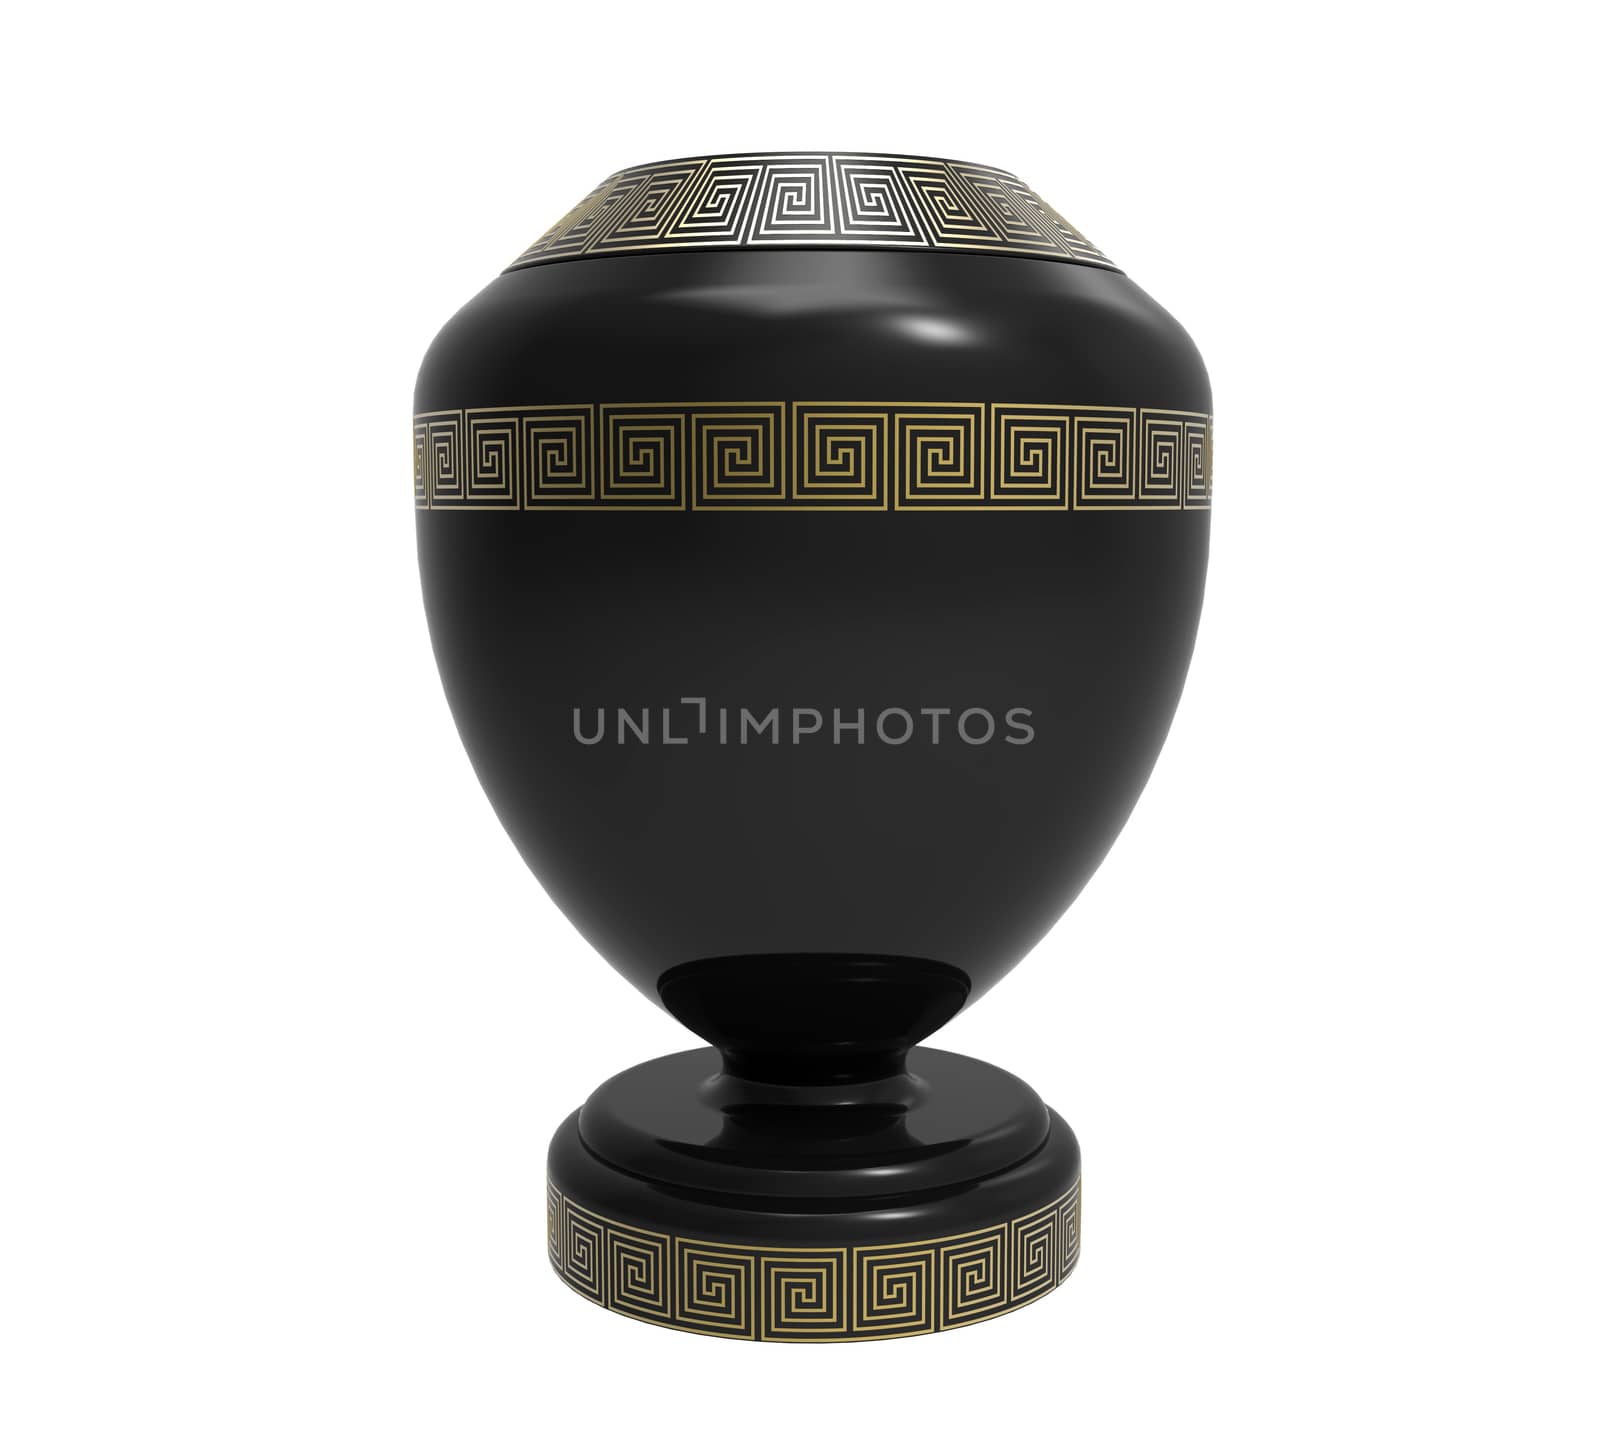 Cremation black urn, 3d render, isolated on white